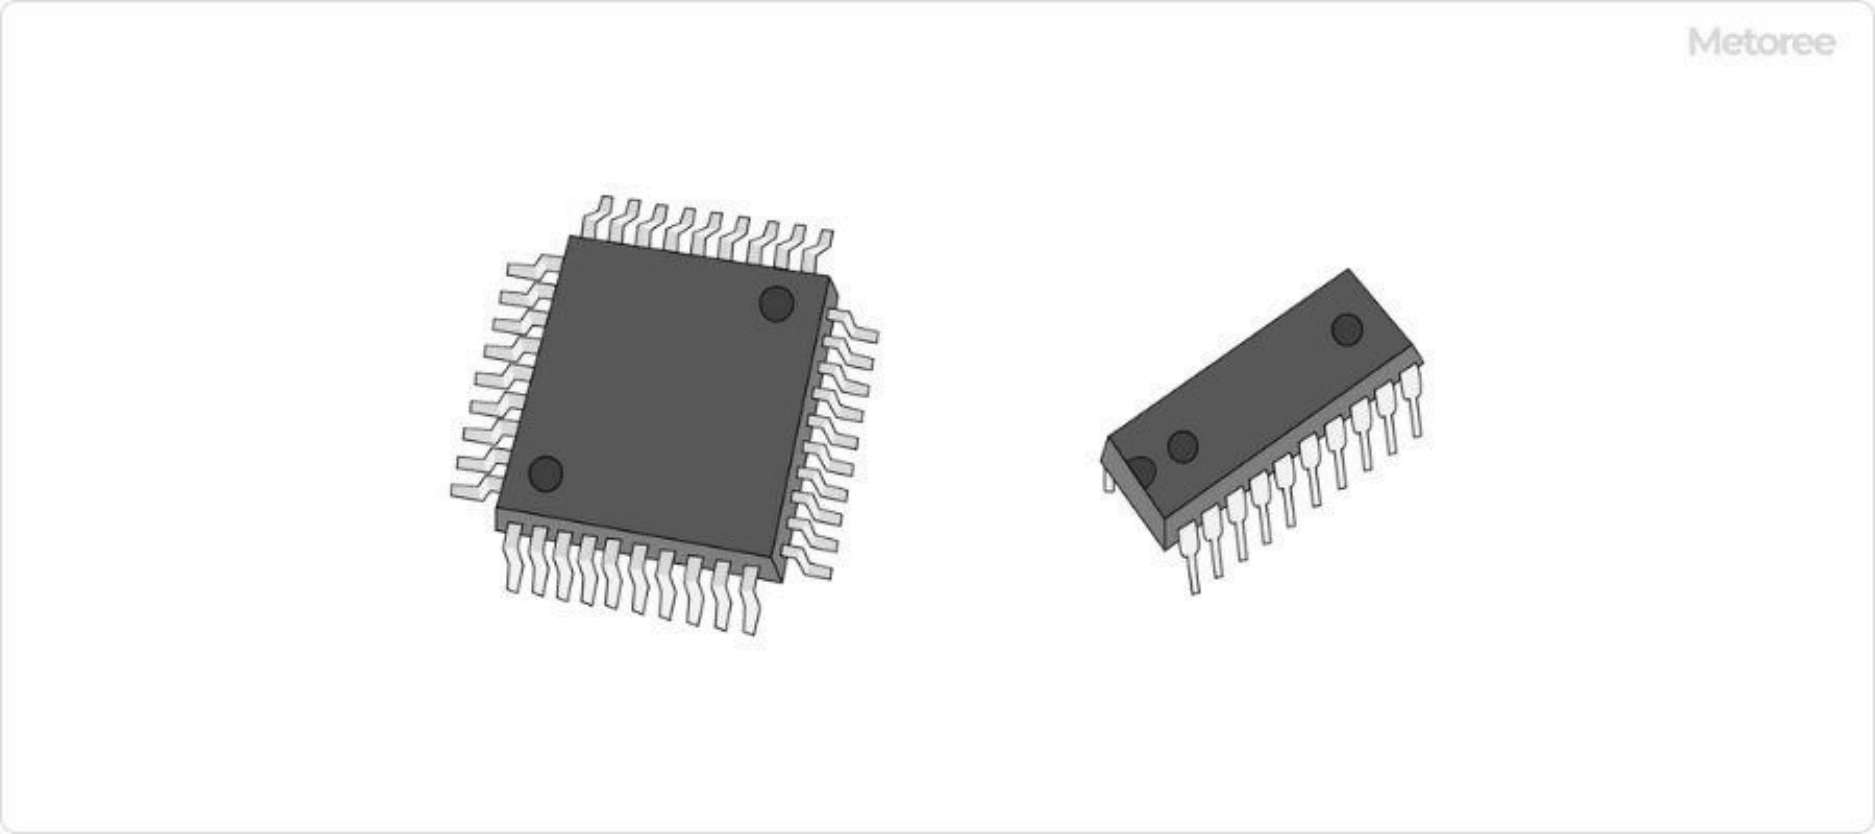 Figure 1. Appearance of the microcontroller